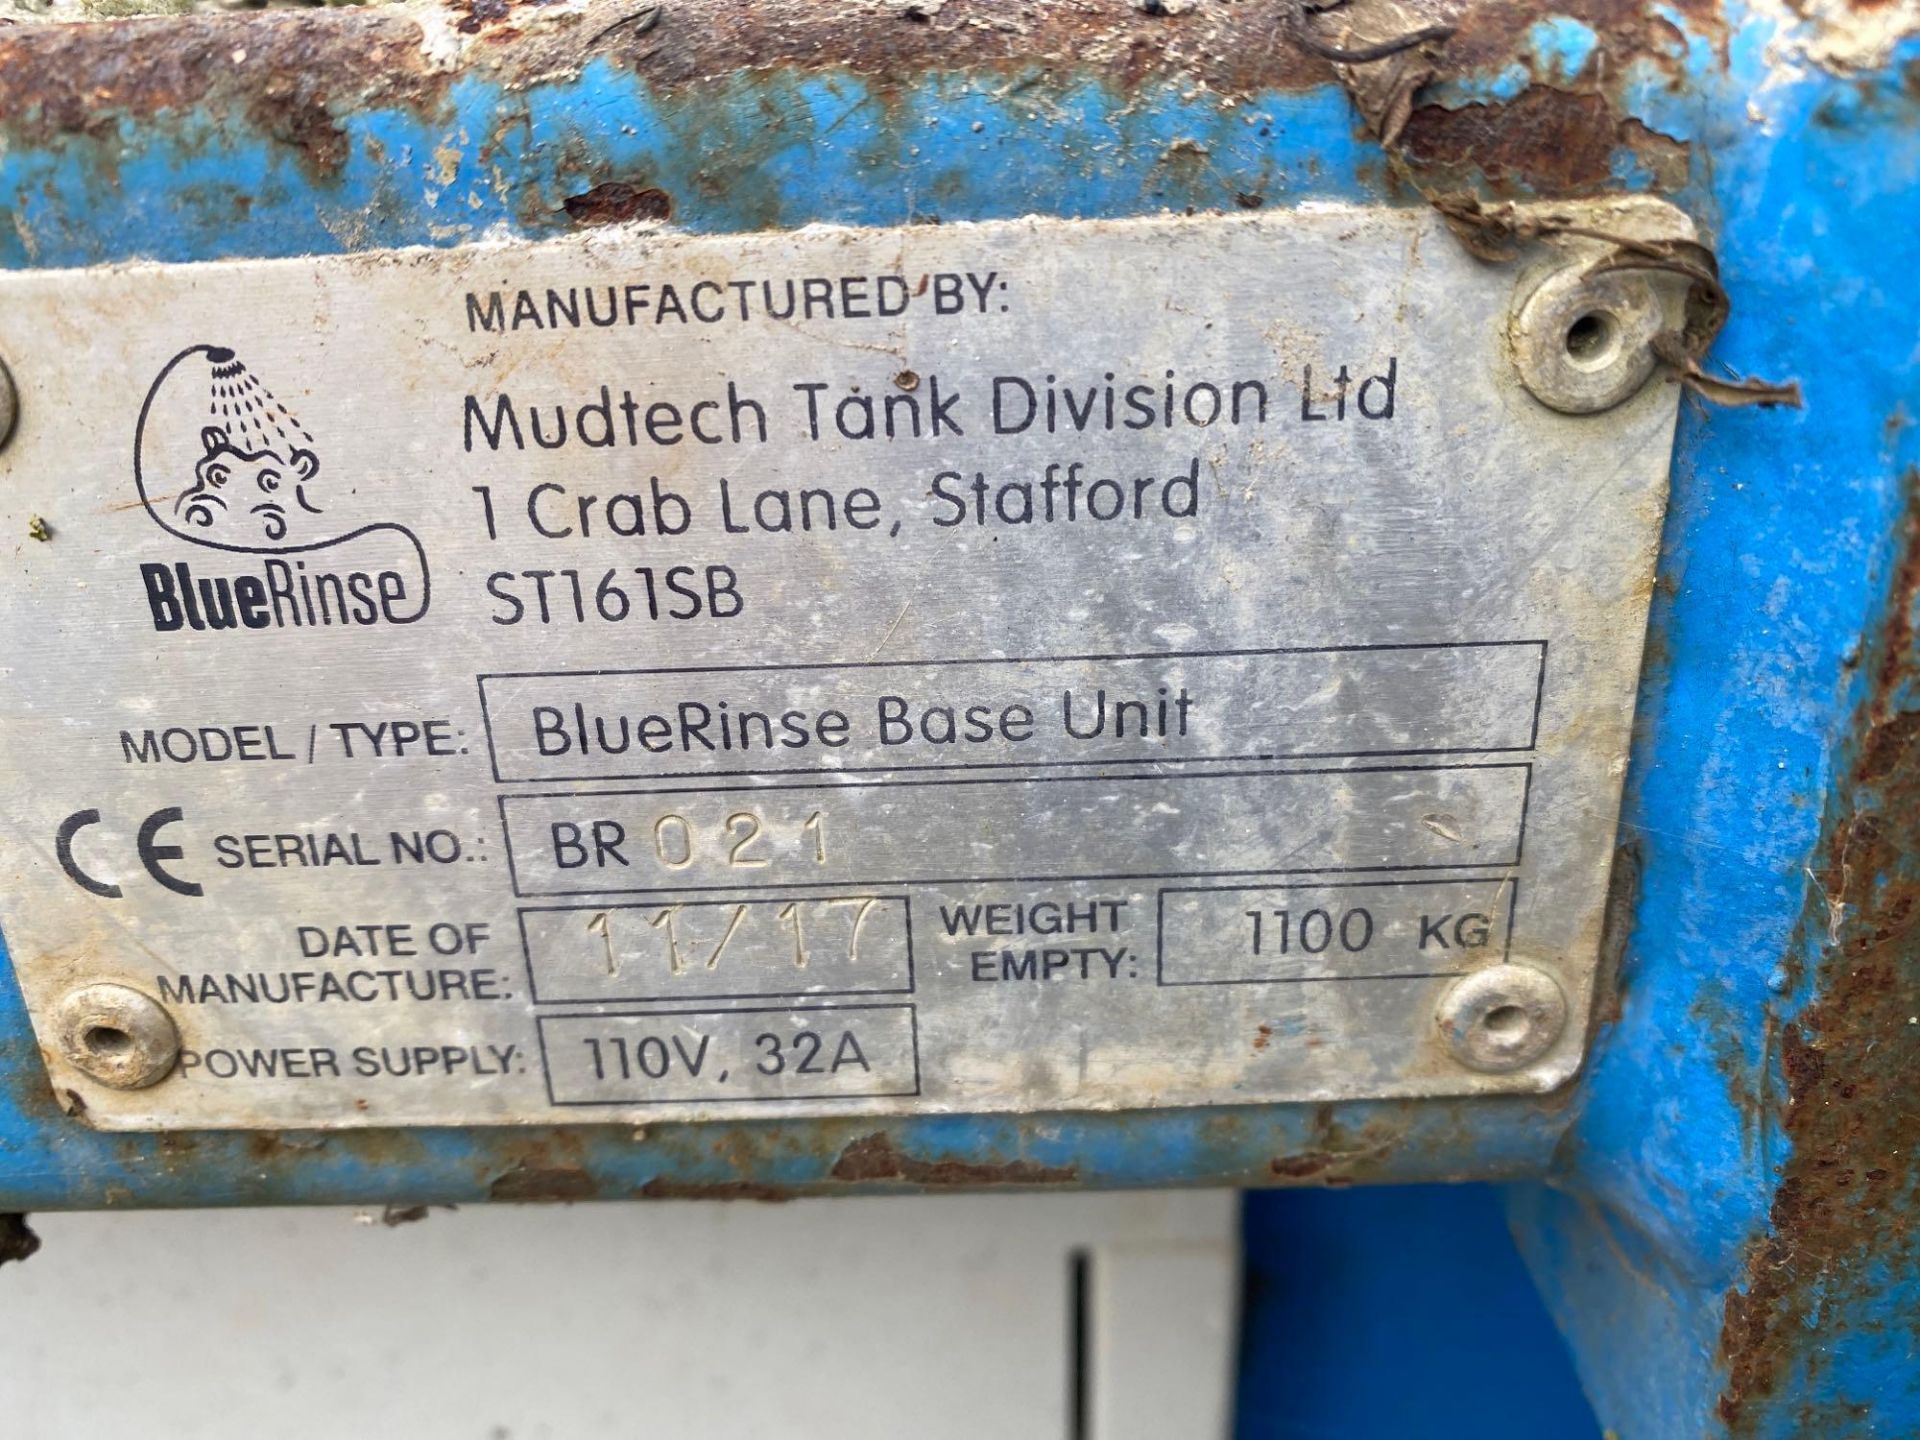 Blue rinse concrete washout unit, date of manufacturer 11/17 - Image 3 of 5